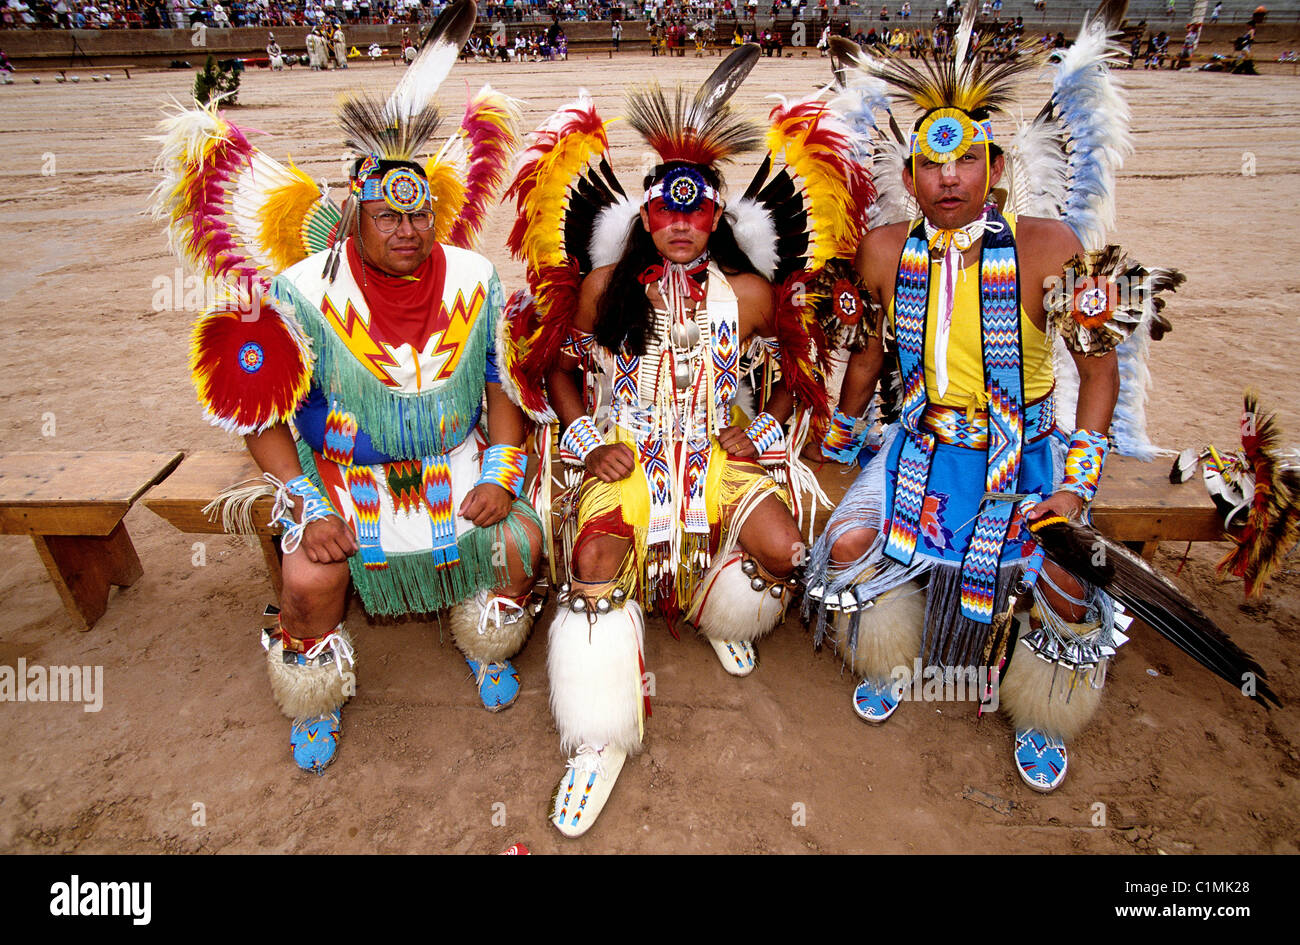 United States New Mexico Gallup Yearly Native Indians Intertribal Ceremonial Reggie Griego & friends Kiowa indians in fancy war Stock Photo